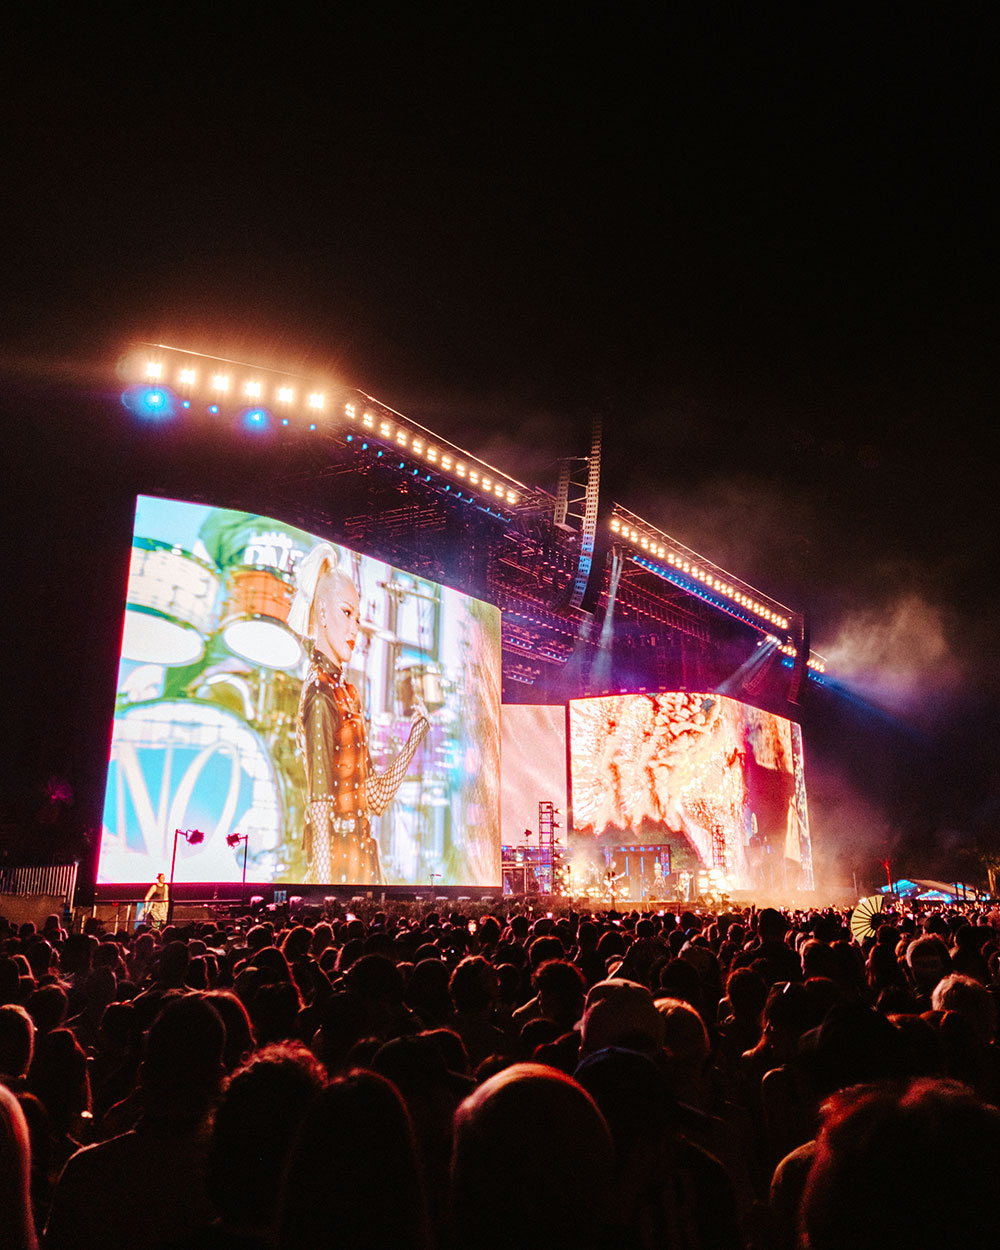 wide photo of No Doubt performing at Coachella stage